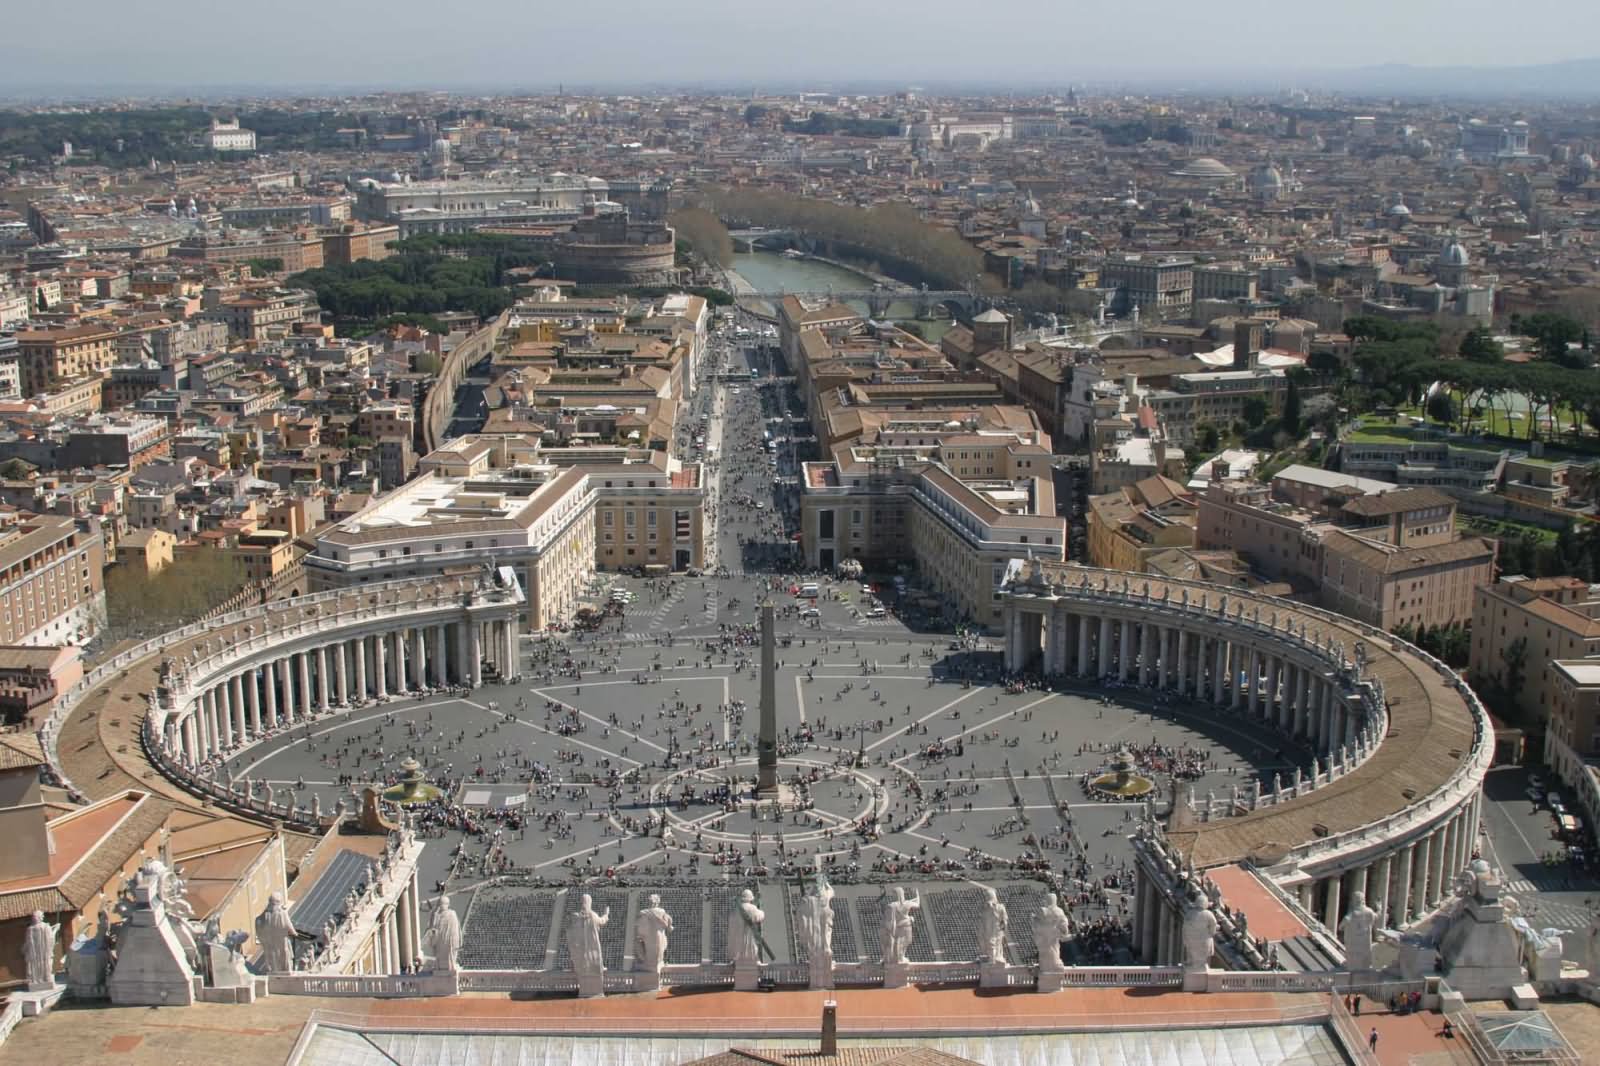 Beautiful St. Peter’s Square View From The Dome Of St. Peter’s Basilica